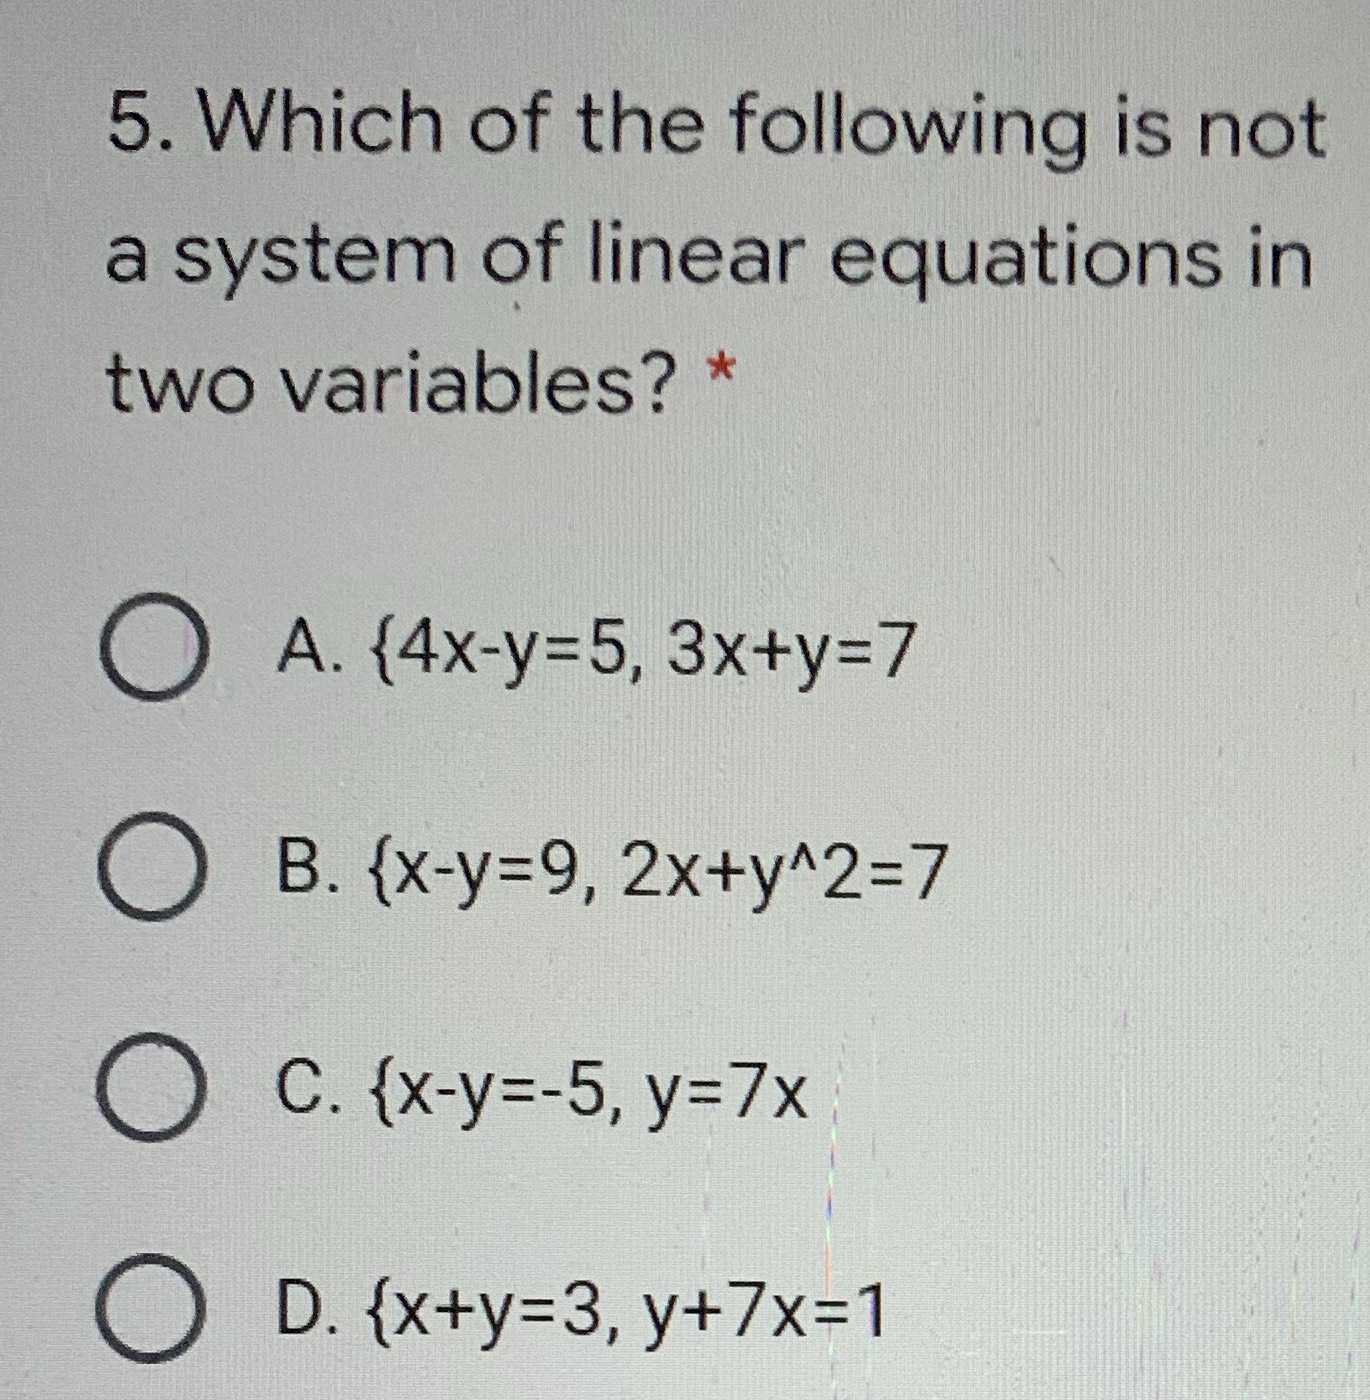 5. Which of the following is not a system of linea...